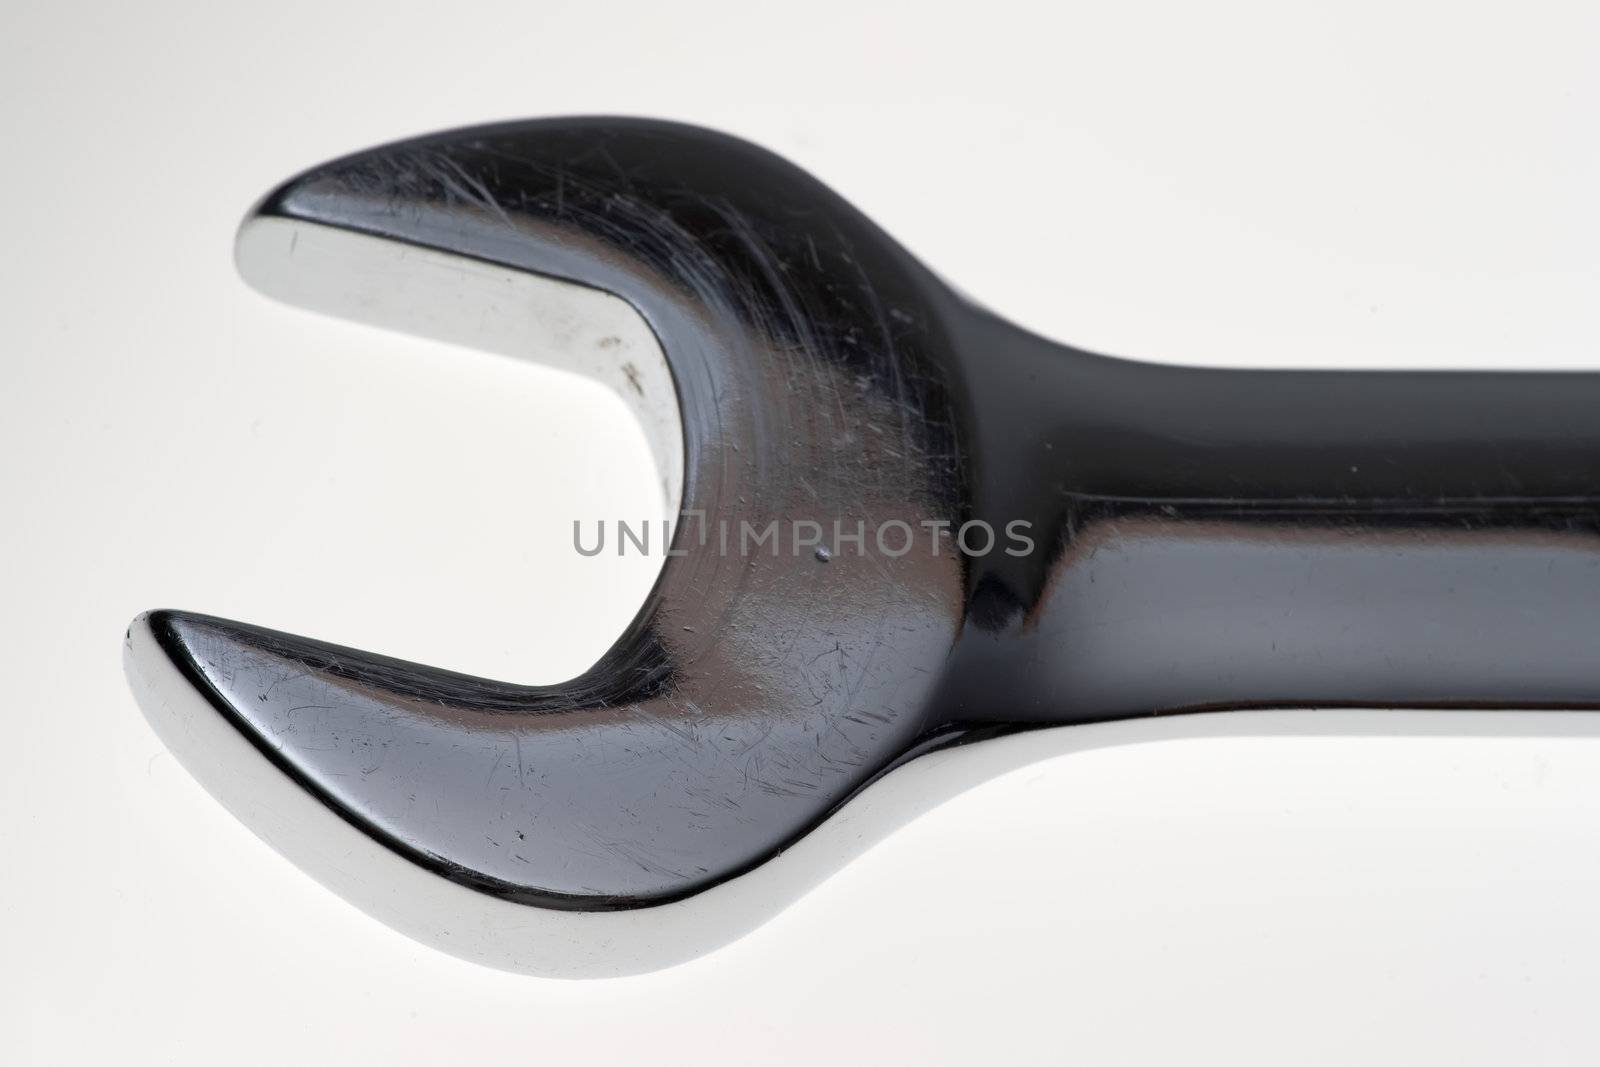 Extreme close up of a wrench head over white background